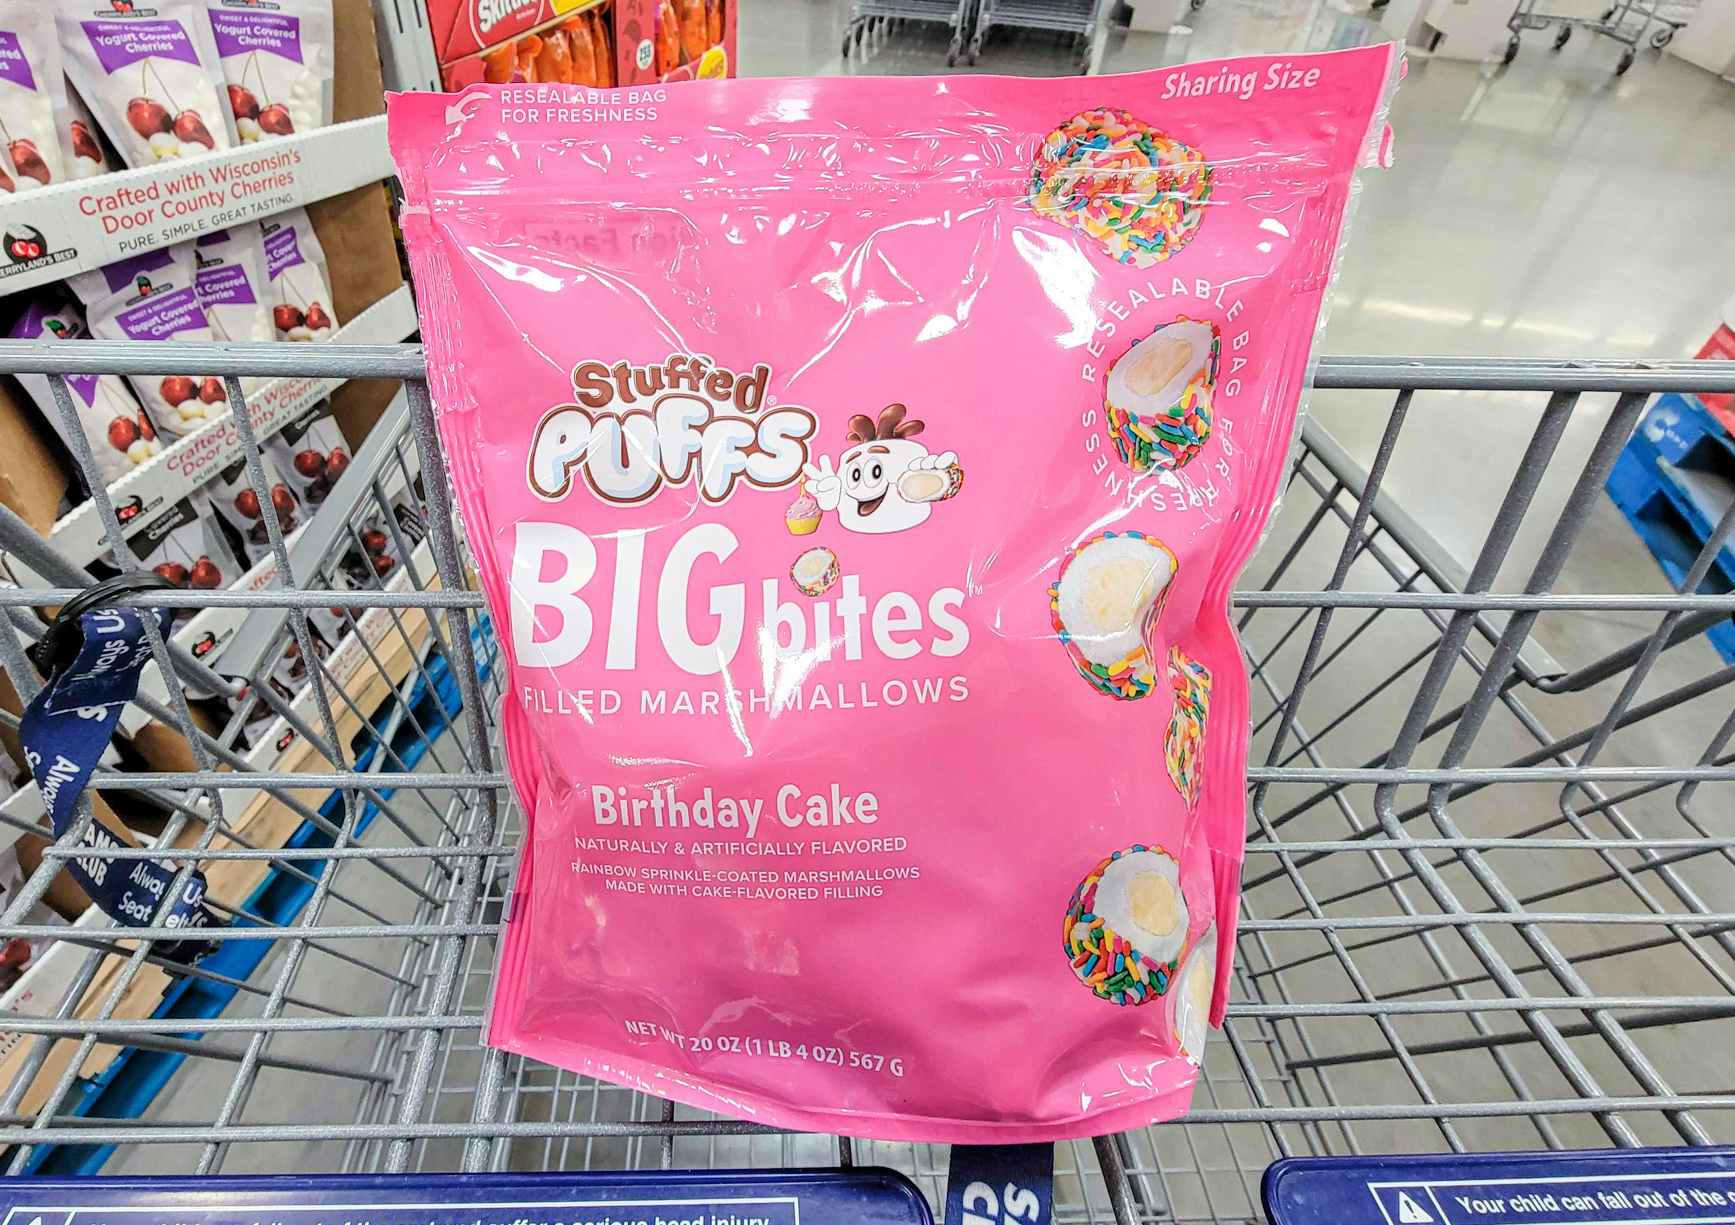 a bag of stuffed puffs birthday cake filled marshmallows in a cart